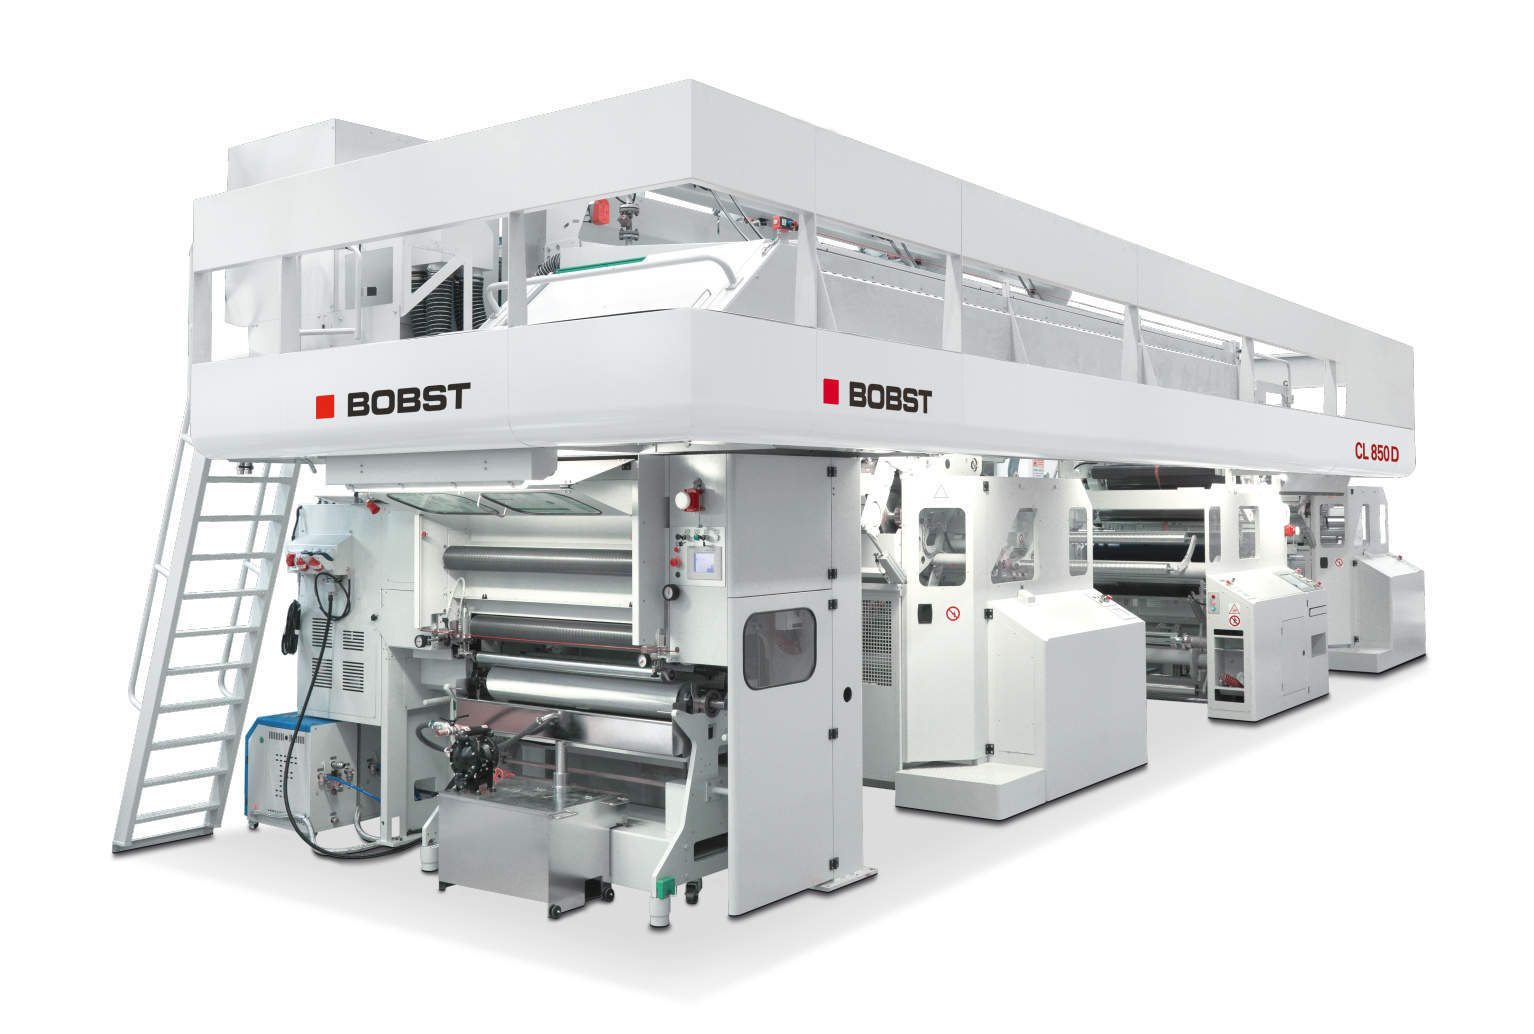 Constantia Flexibles invests in Bobst’s CL 850D laminator for pharma packaging